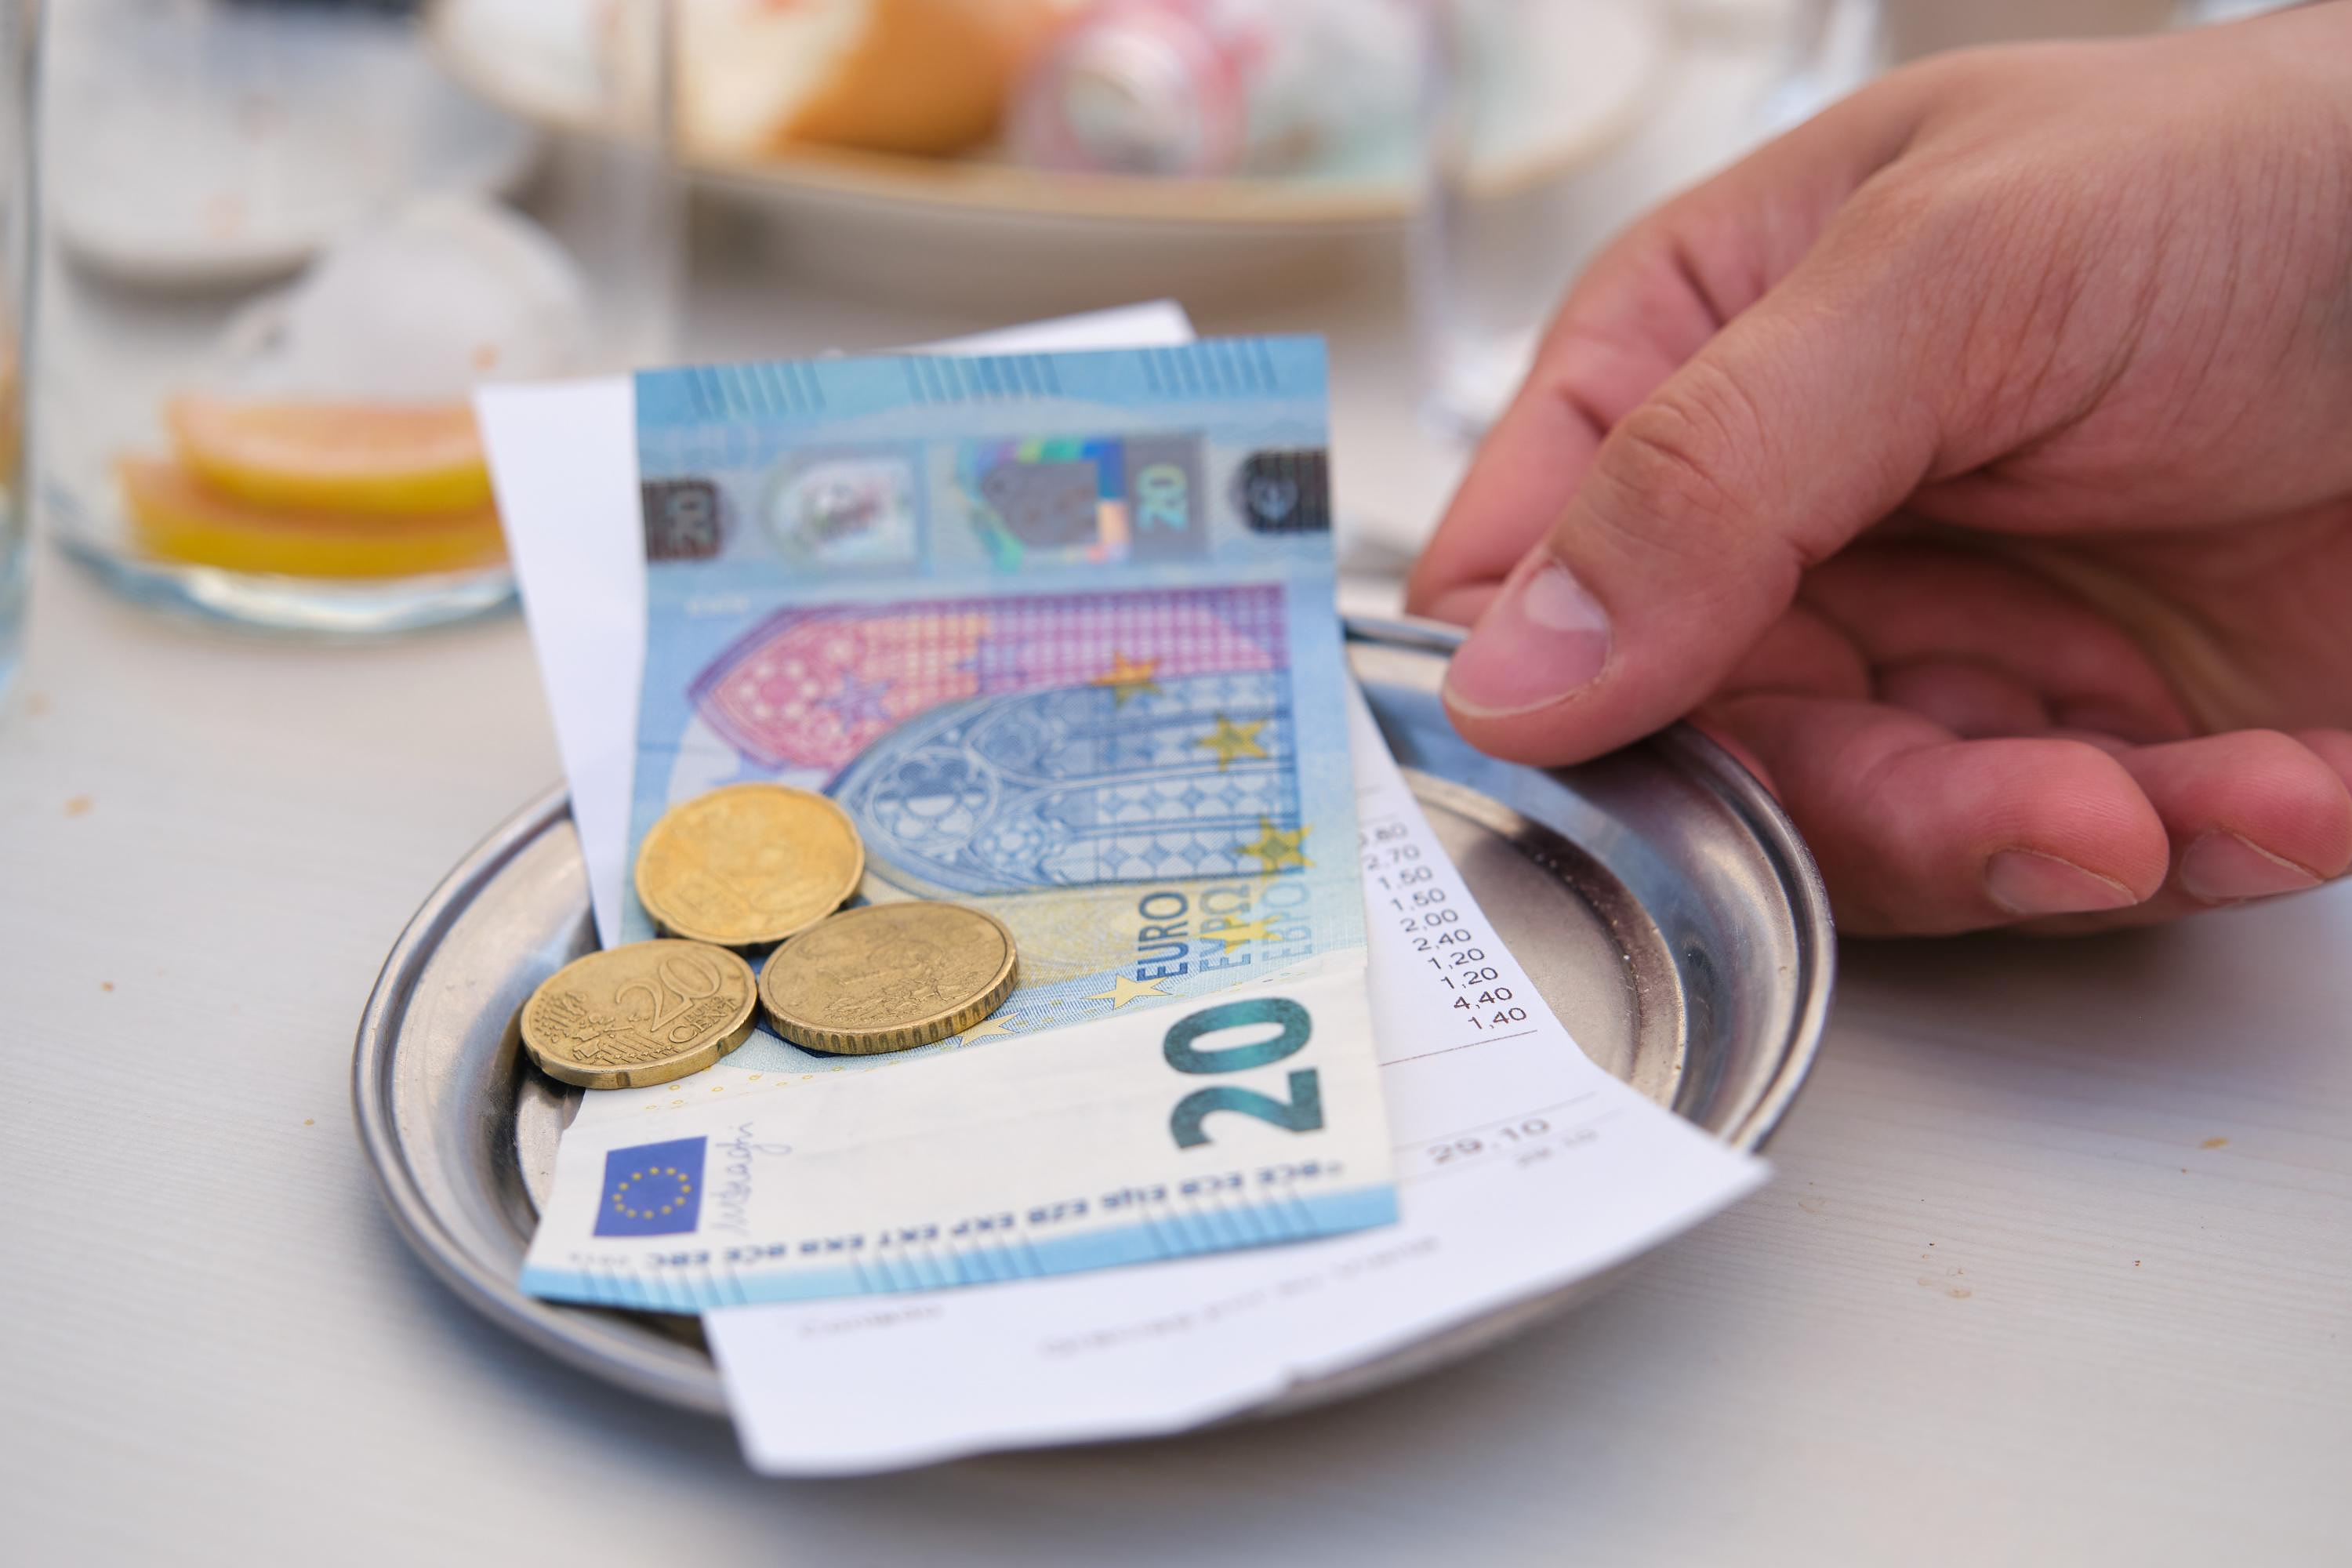 Two, three or a hundred euros: who are the most generous customers with tips?